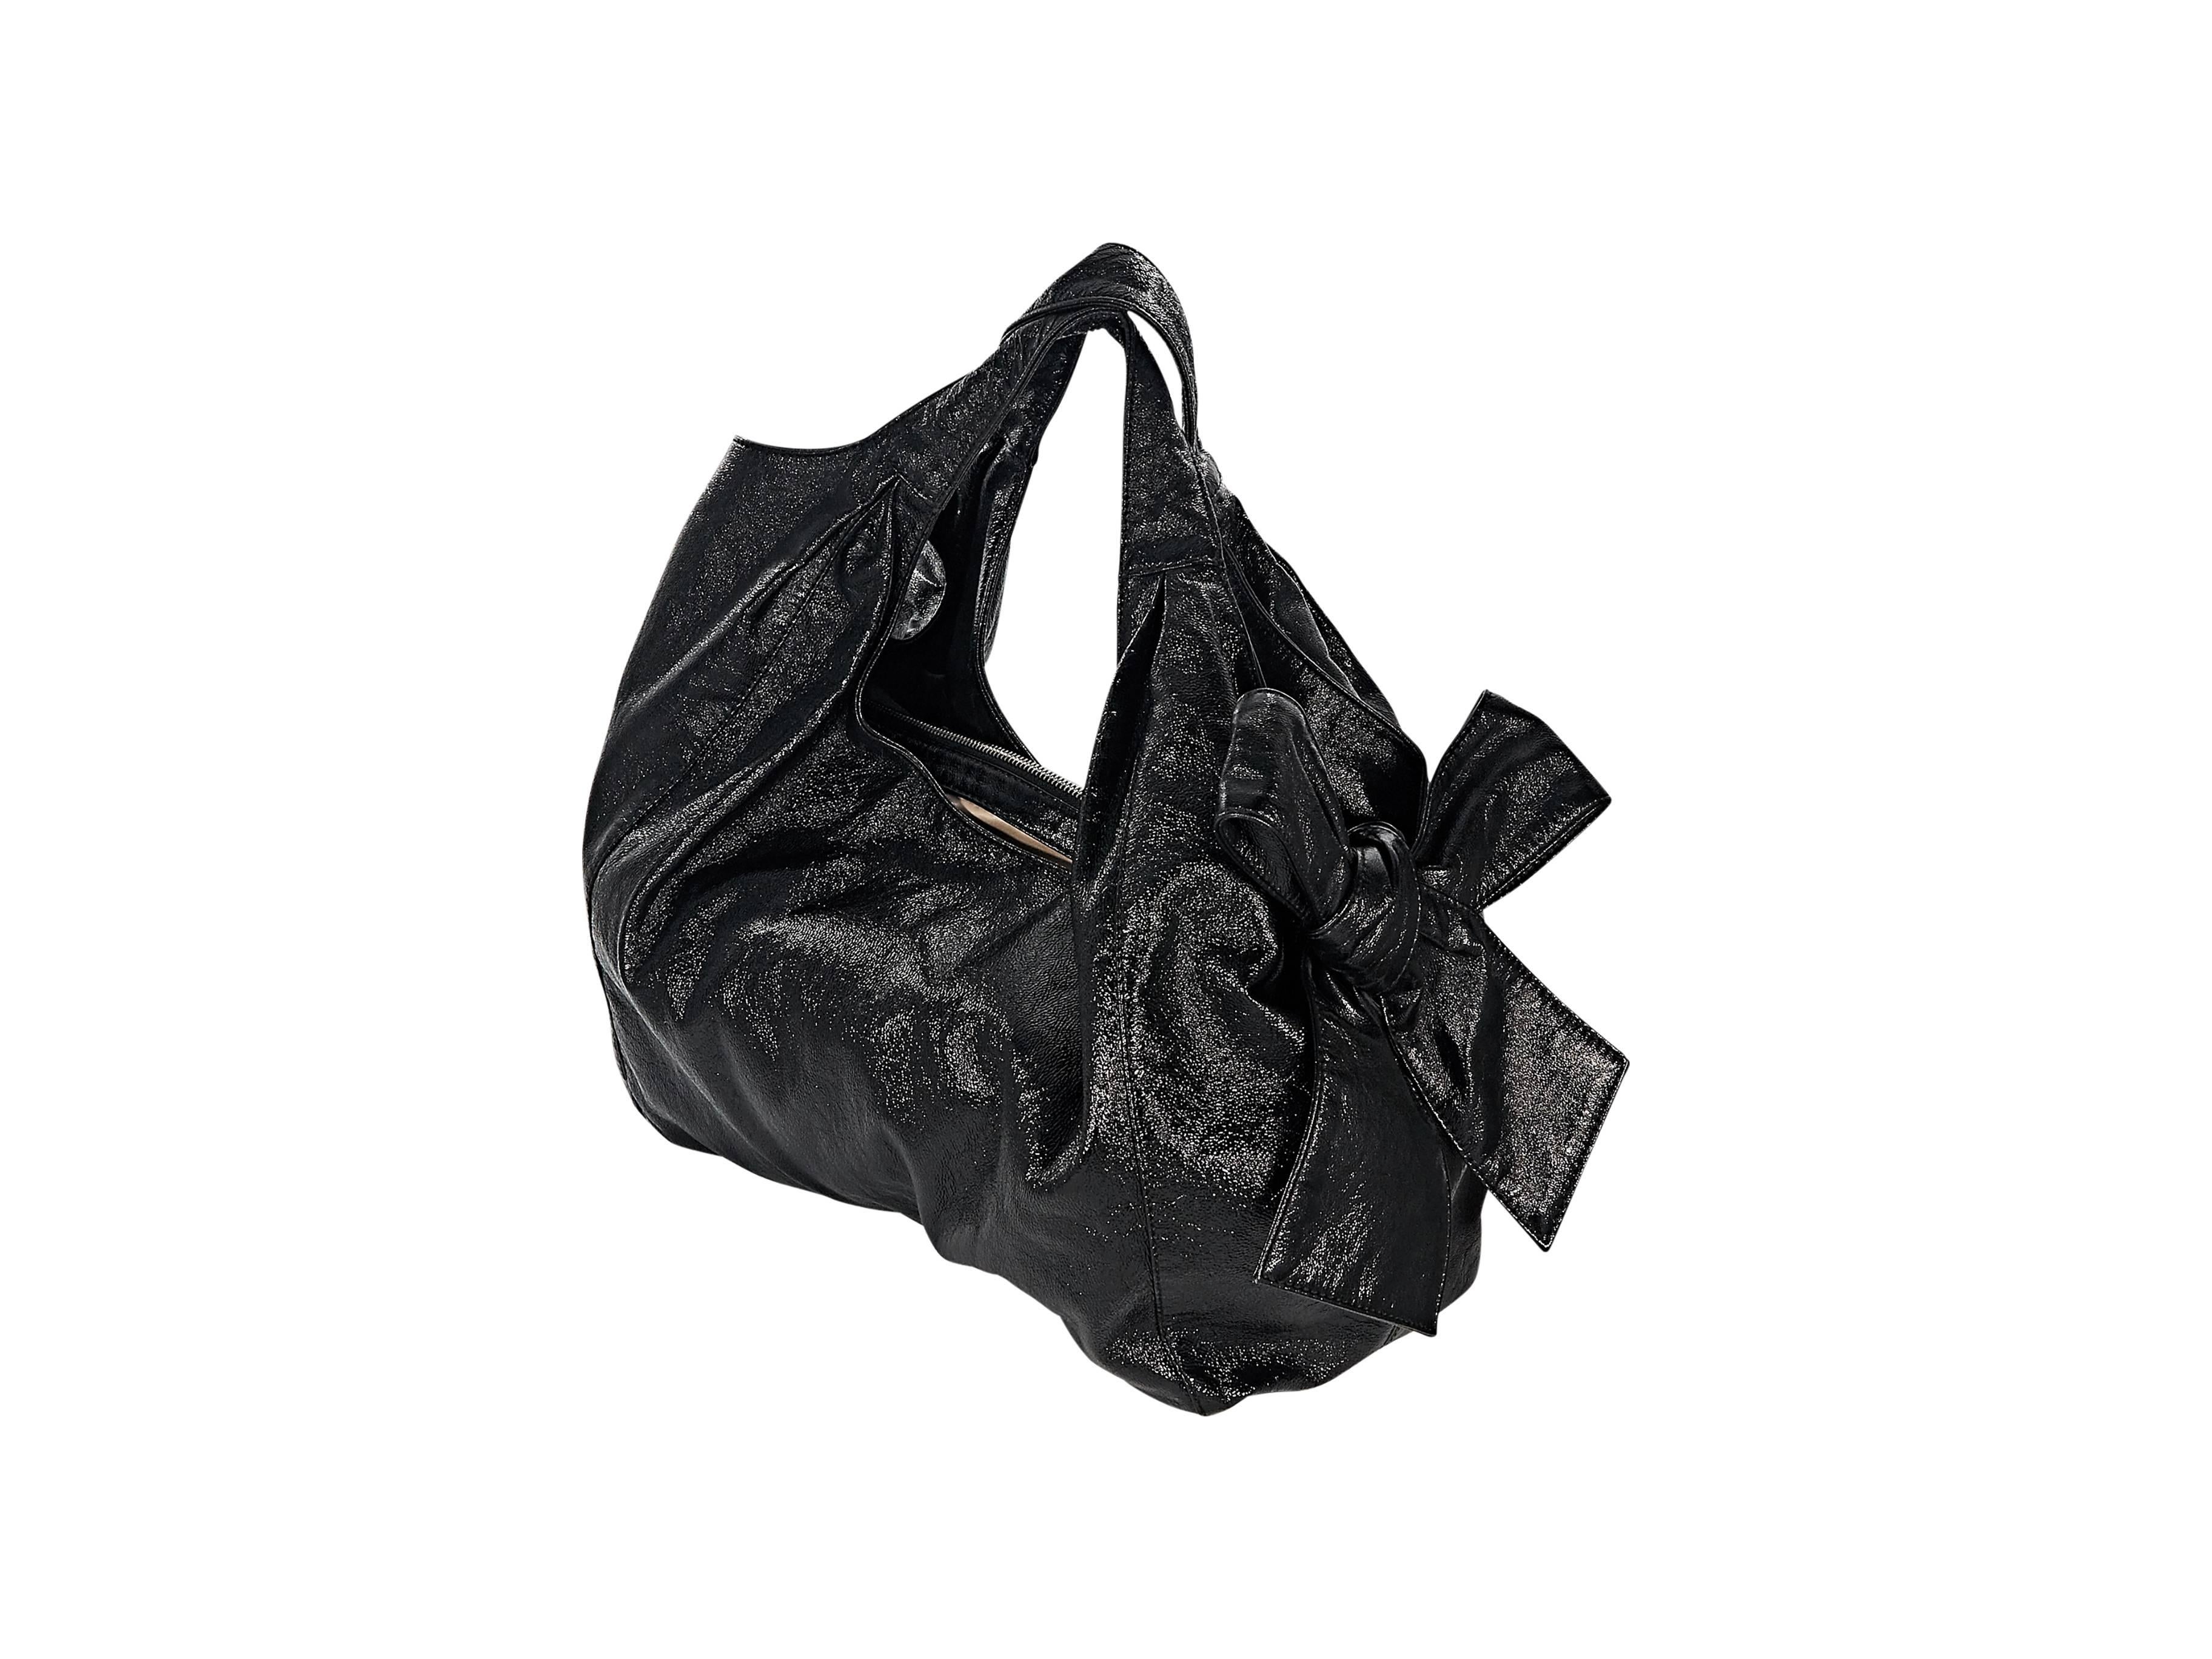 Product details: Black patent leather Nuage bow bag by Valentino. Dual carry straps. Magnetic snap closure. Lined interior with center zip divider and zip pocket. Silvertone hardware. 14"L x 11"H x 6"D. 10" strap